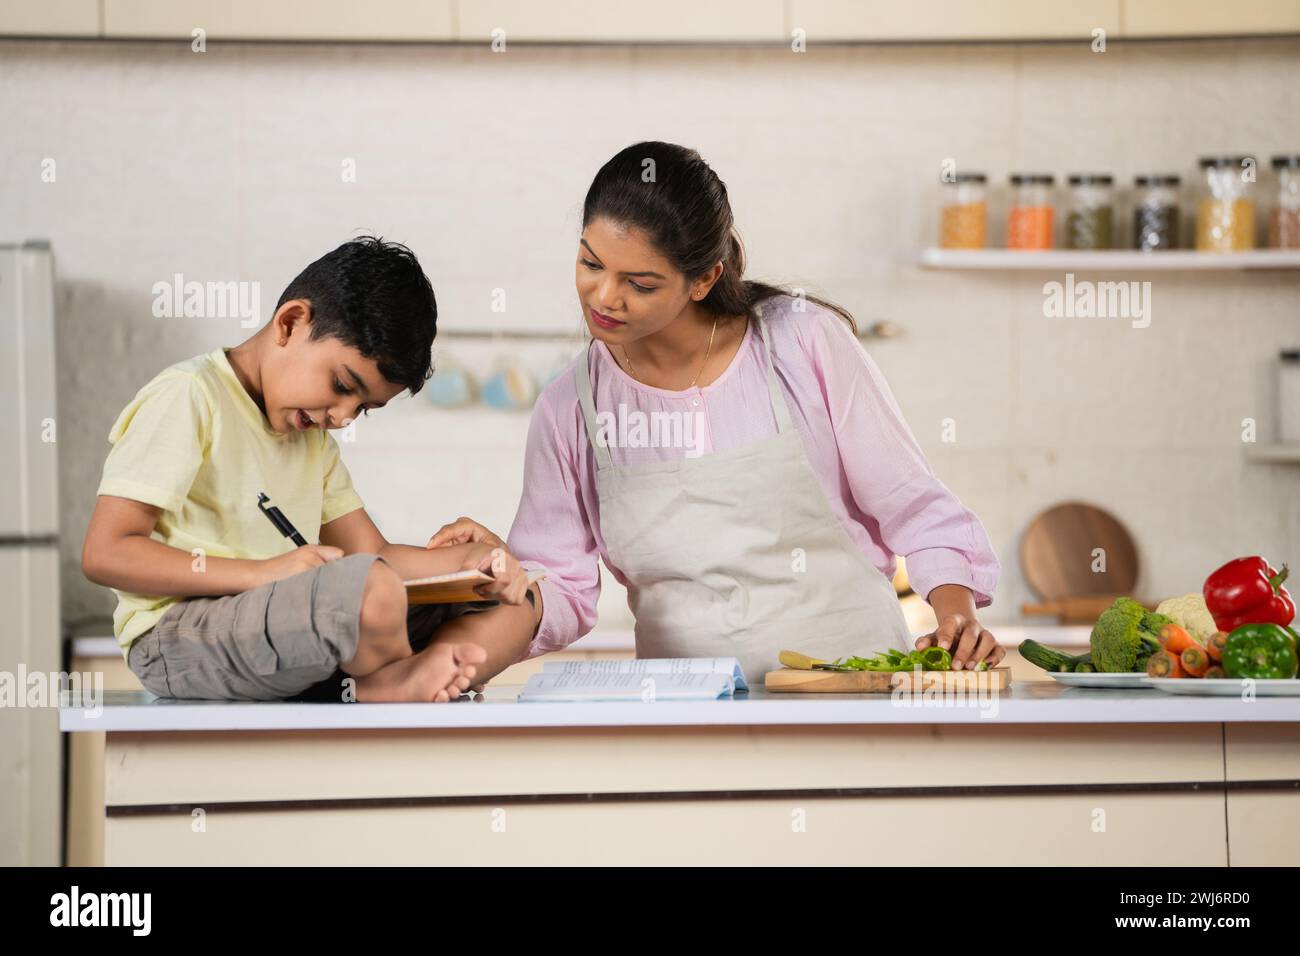 Indian working mother at kitchen helping her kid or child to do homework - concept of multitasking, parenthood and family responsibility Stock Photo